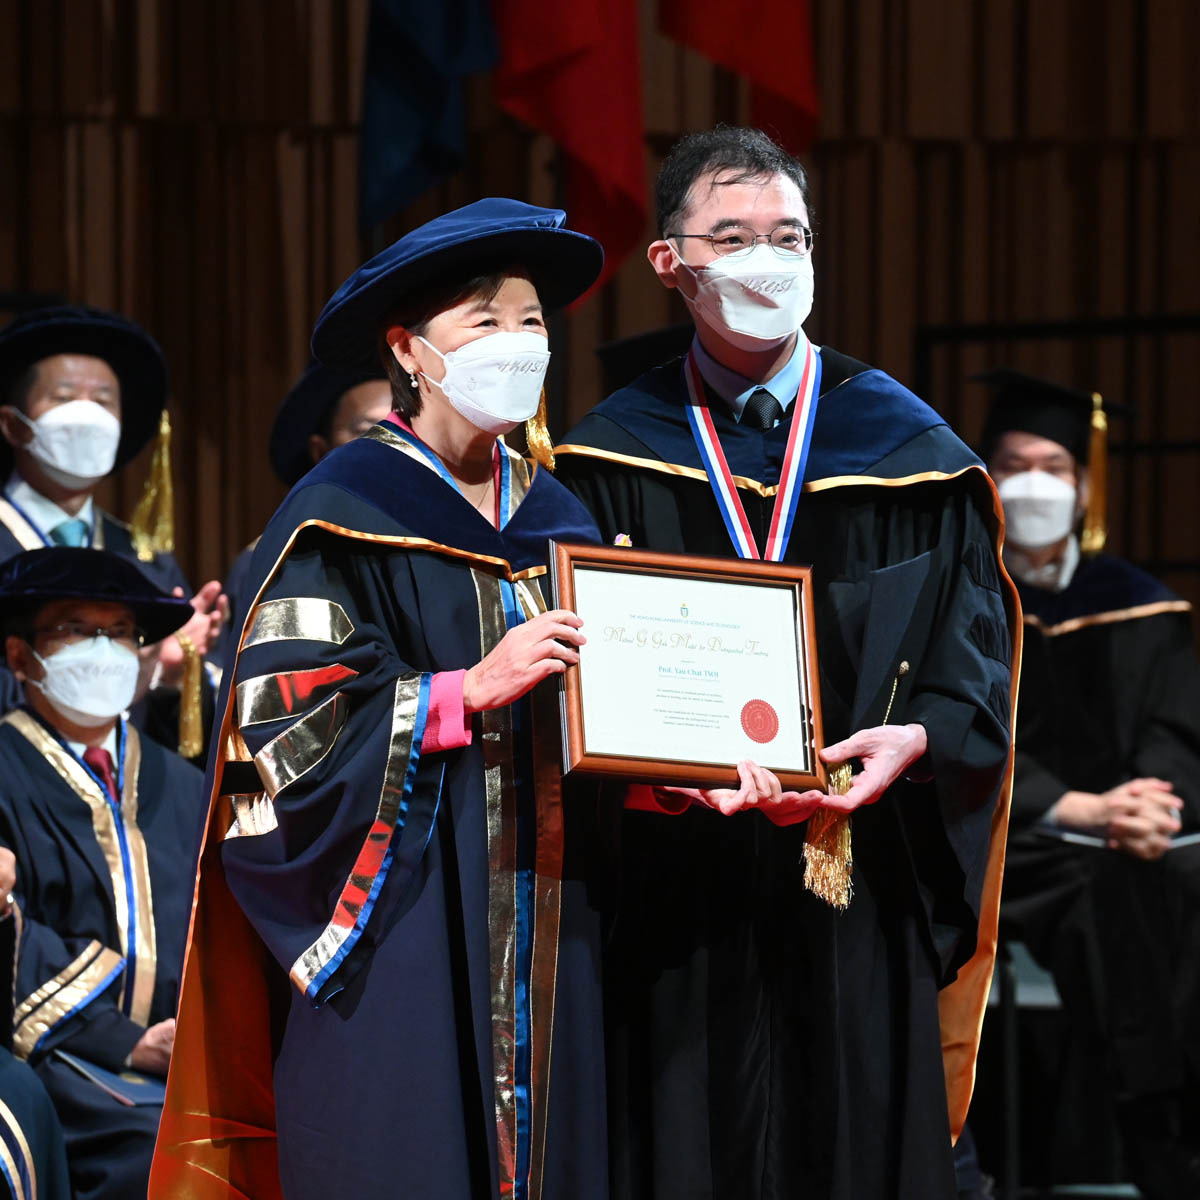 Prof. Nancy IP (left) presented the Michael G. Gale Medal for Distinguished Teaching to Prof. Desmond TSOI Yau-Chat (right) of the Department of Computer Science & Engineering